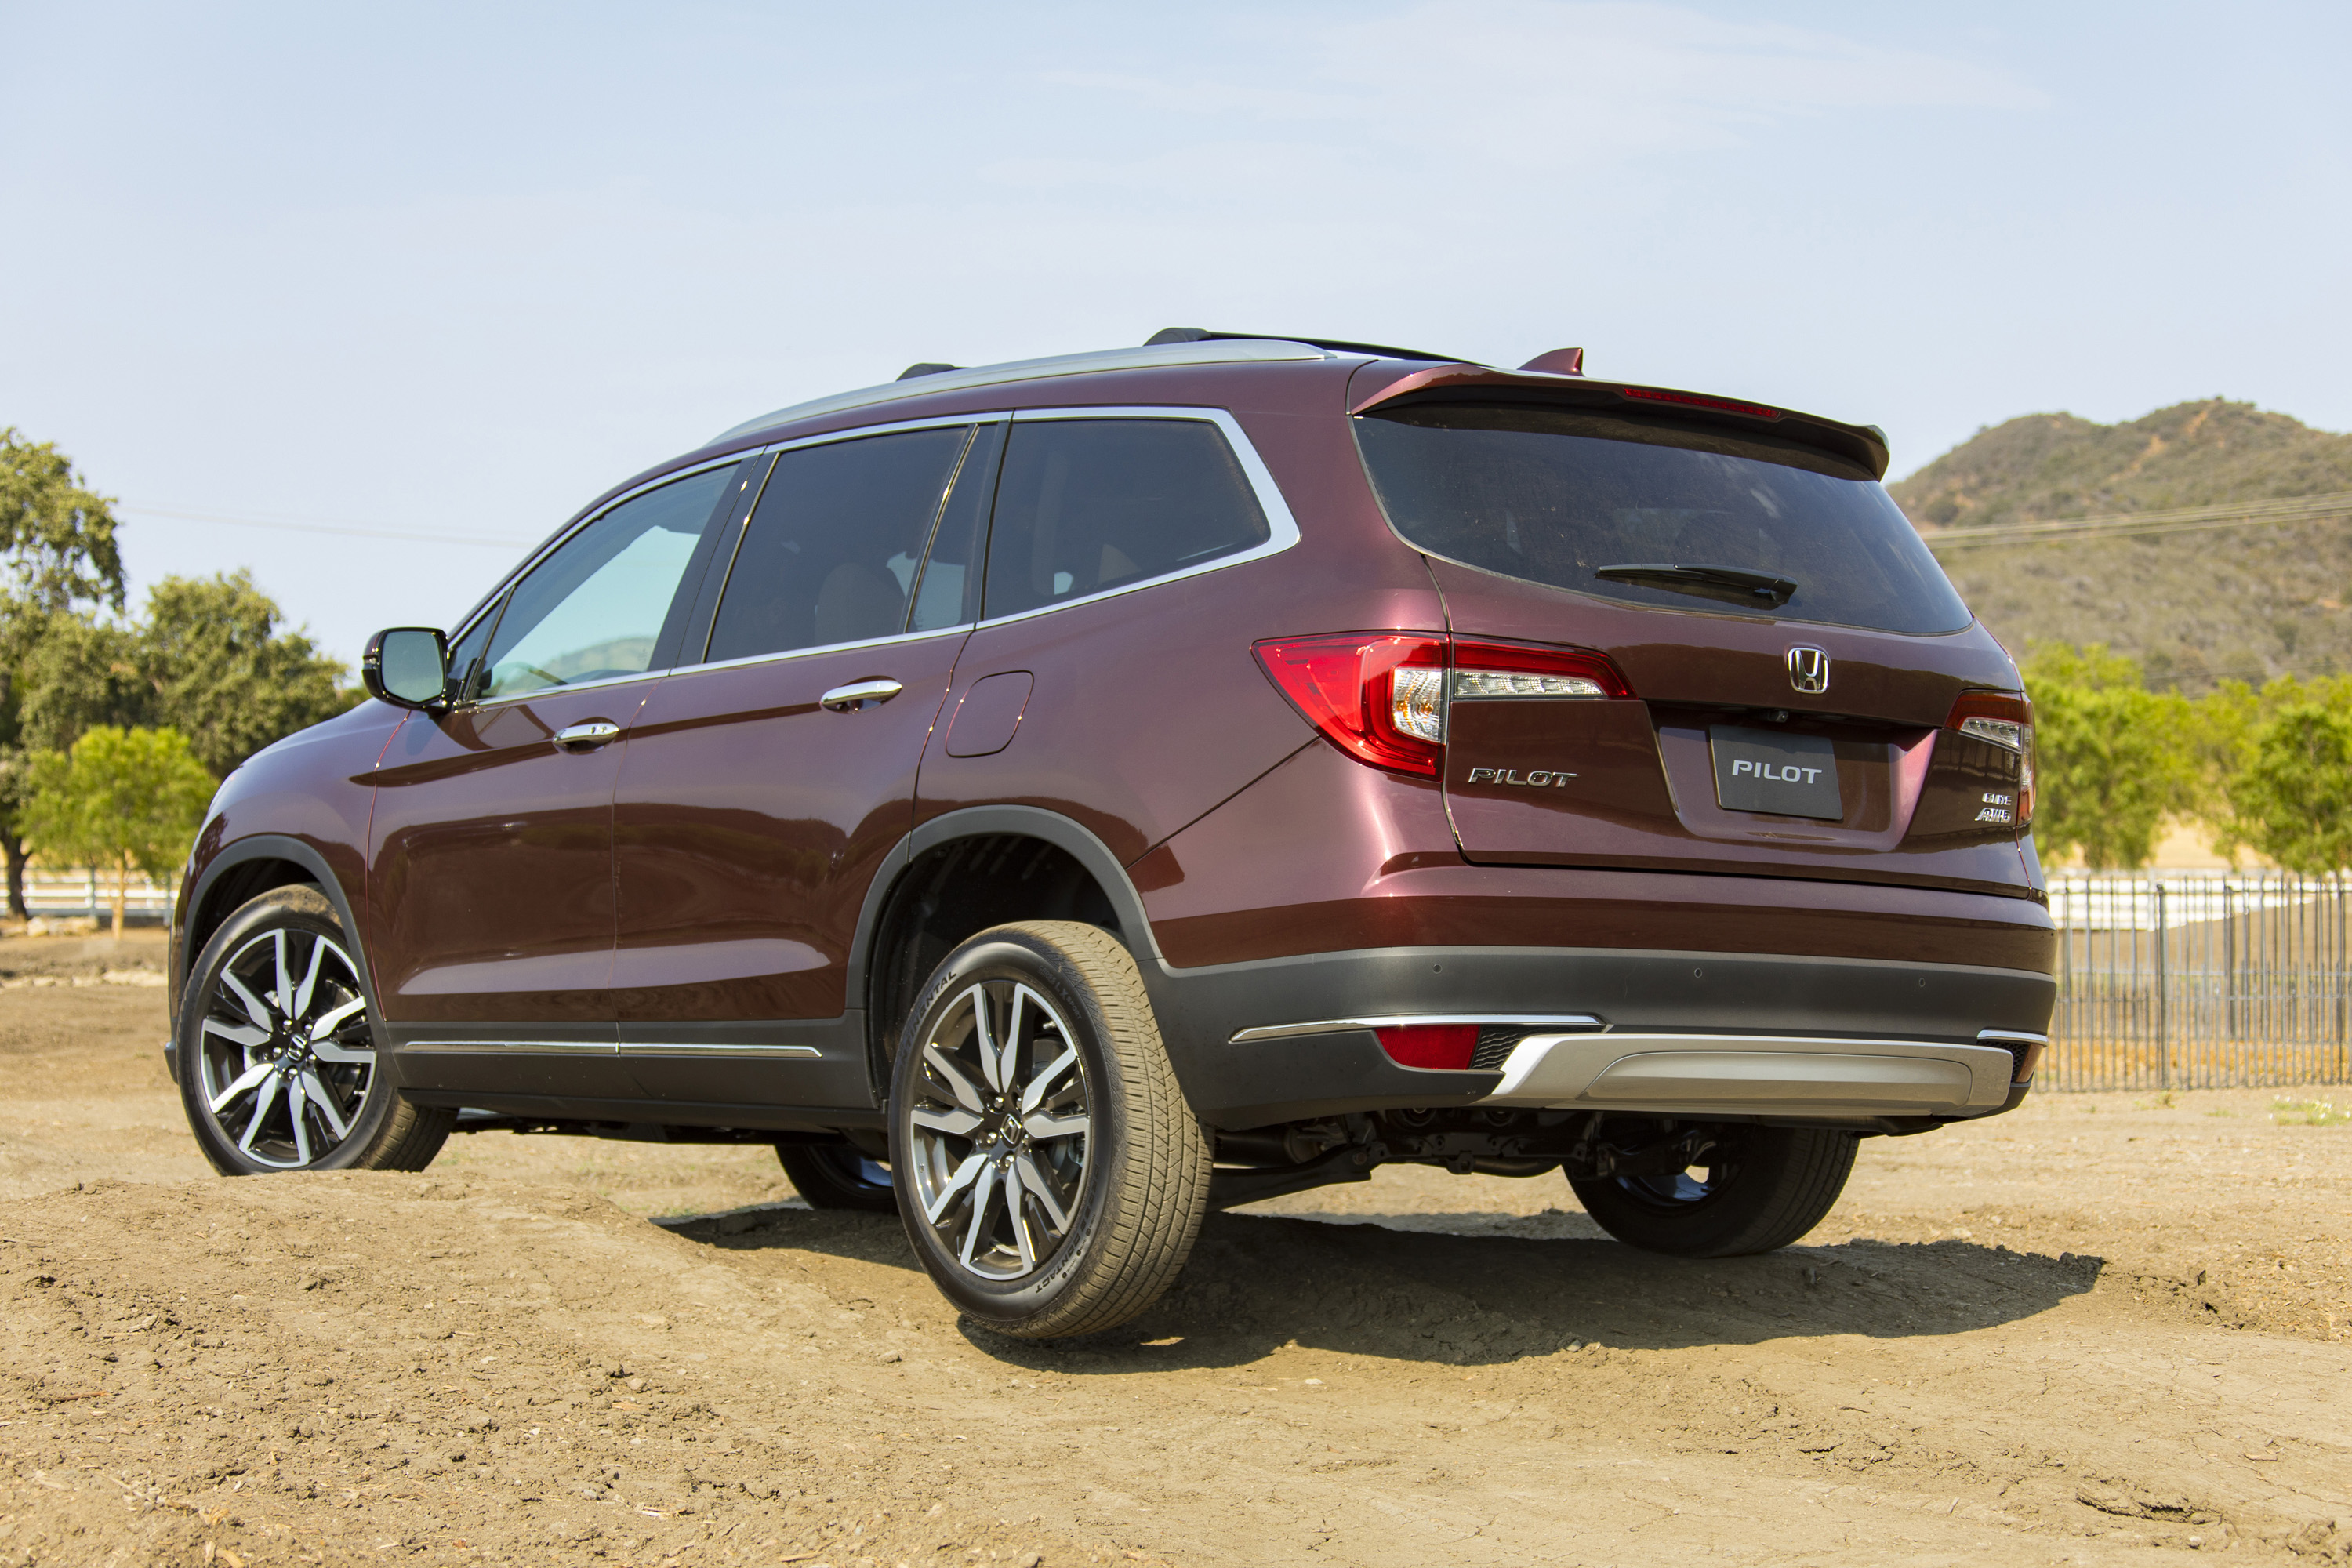 2022 Honda Pilot Review | What's new, price, safety, features